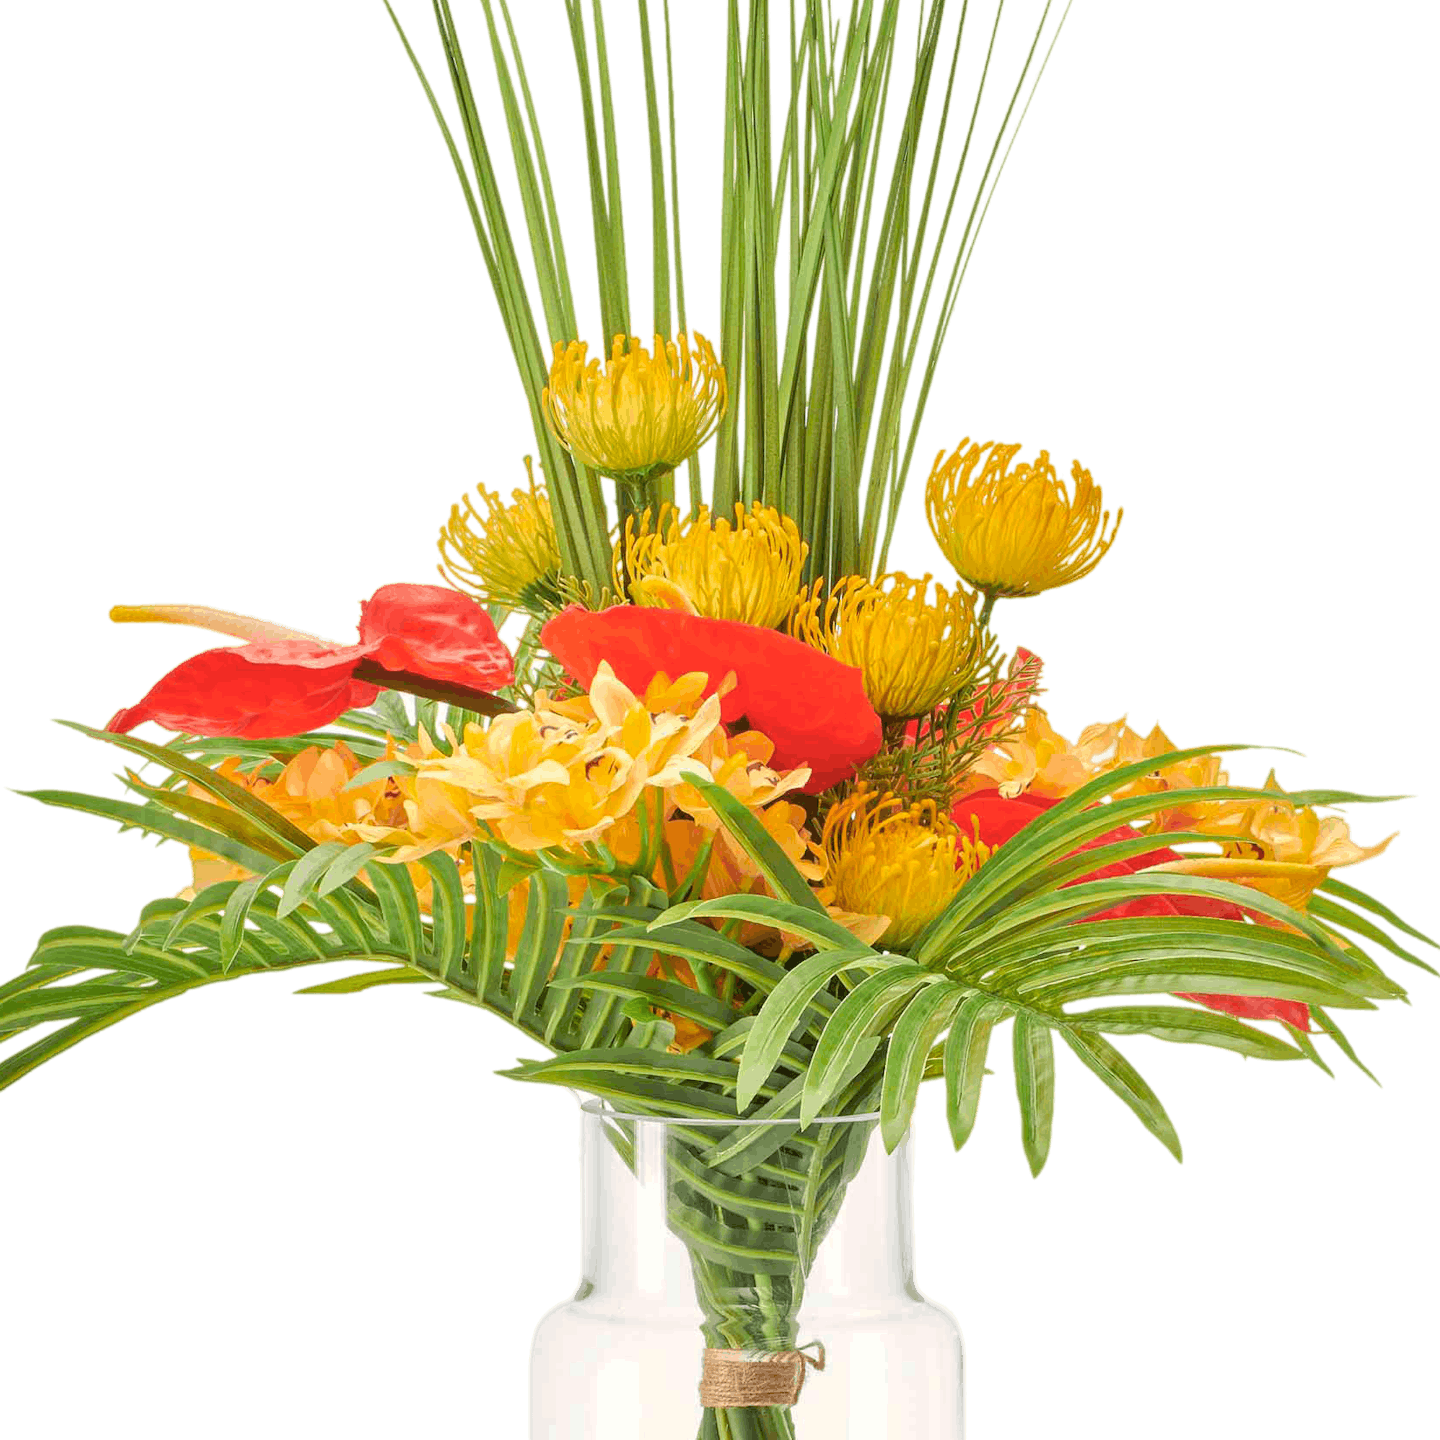 Artificial Bahama mama bouquet in a glass vase